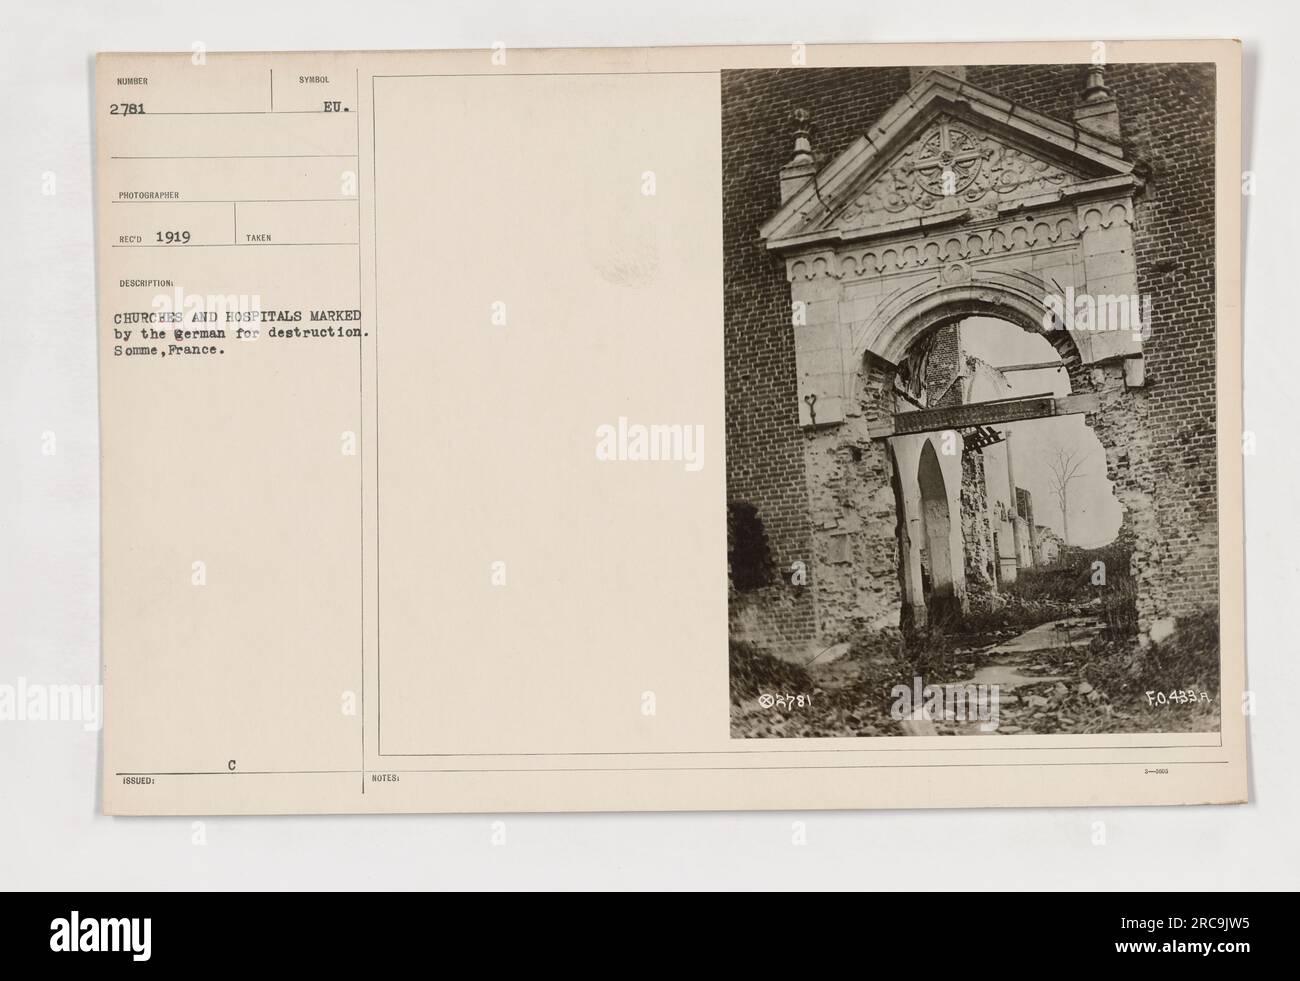 German-occupied areas in Somme, France. Some churches and hospitals were marked for destruction by the Germans. This photo depicts the targeted buildings. Photo acquired in 1919. Stock Photo